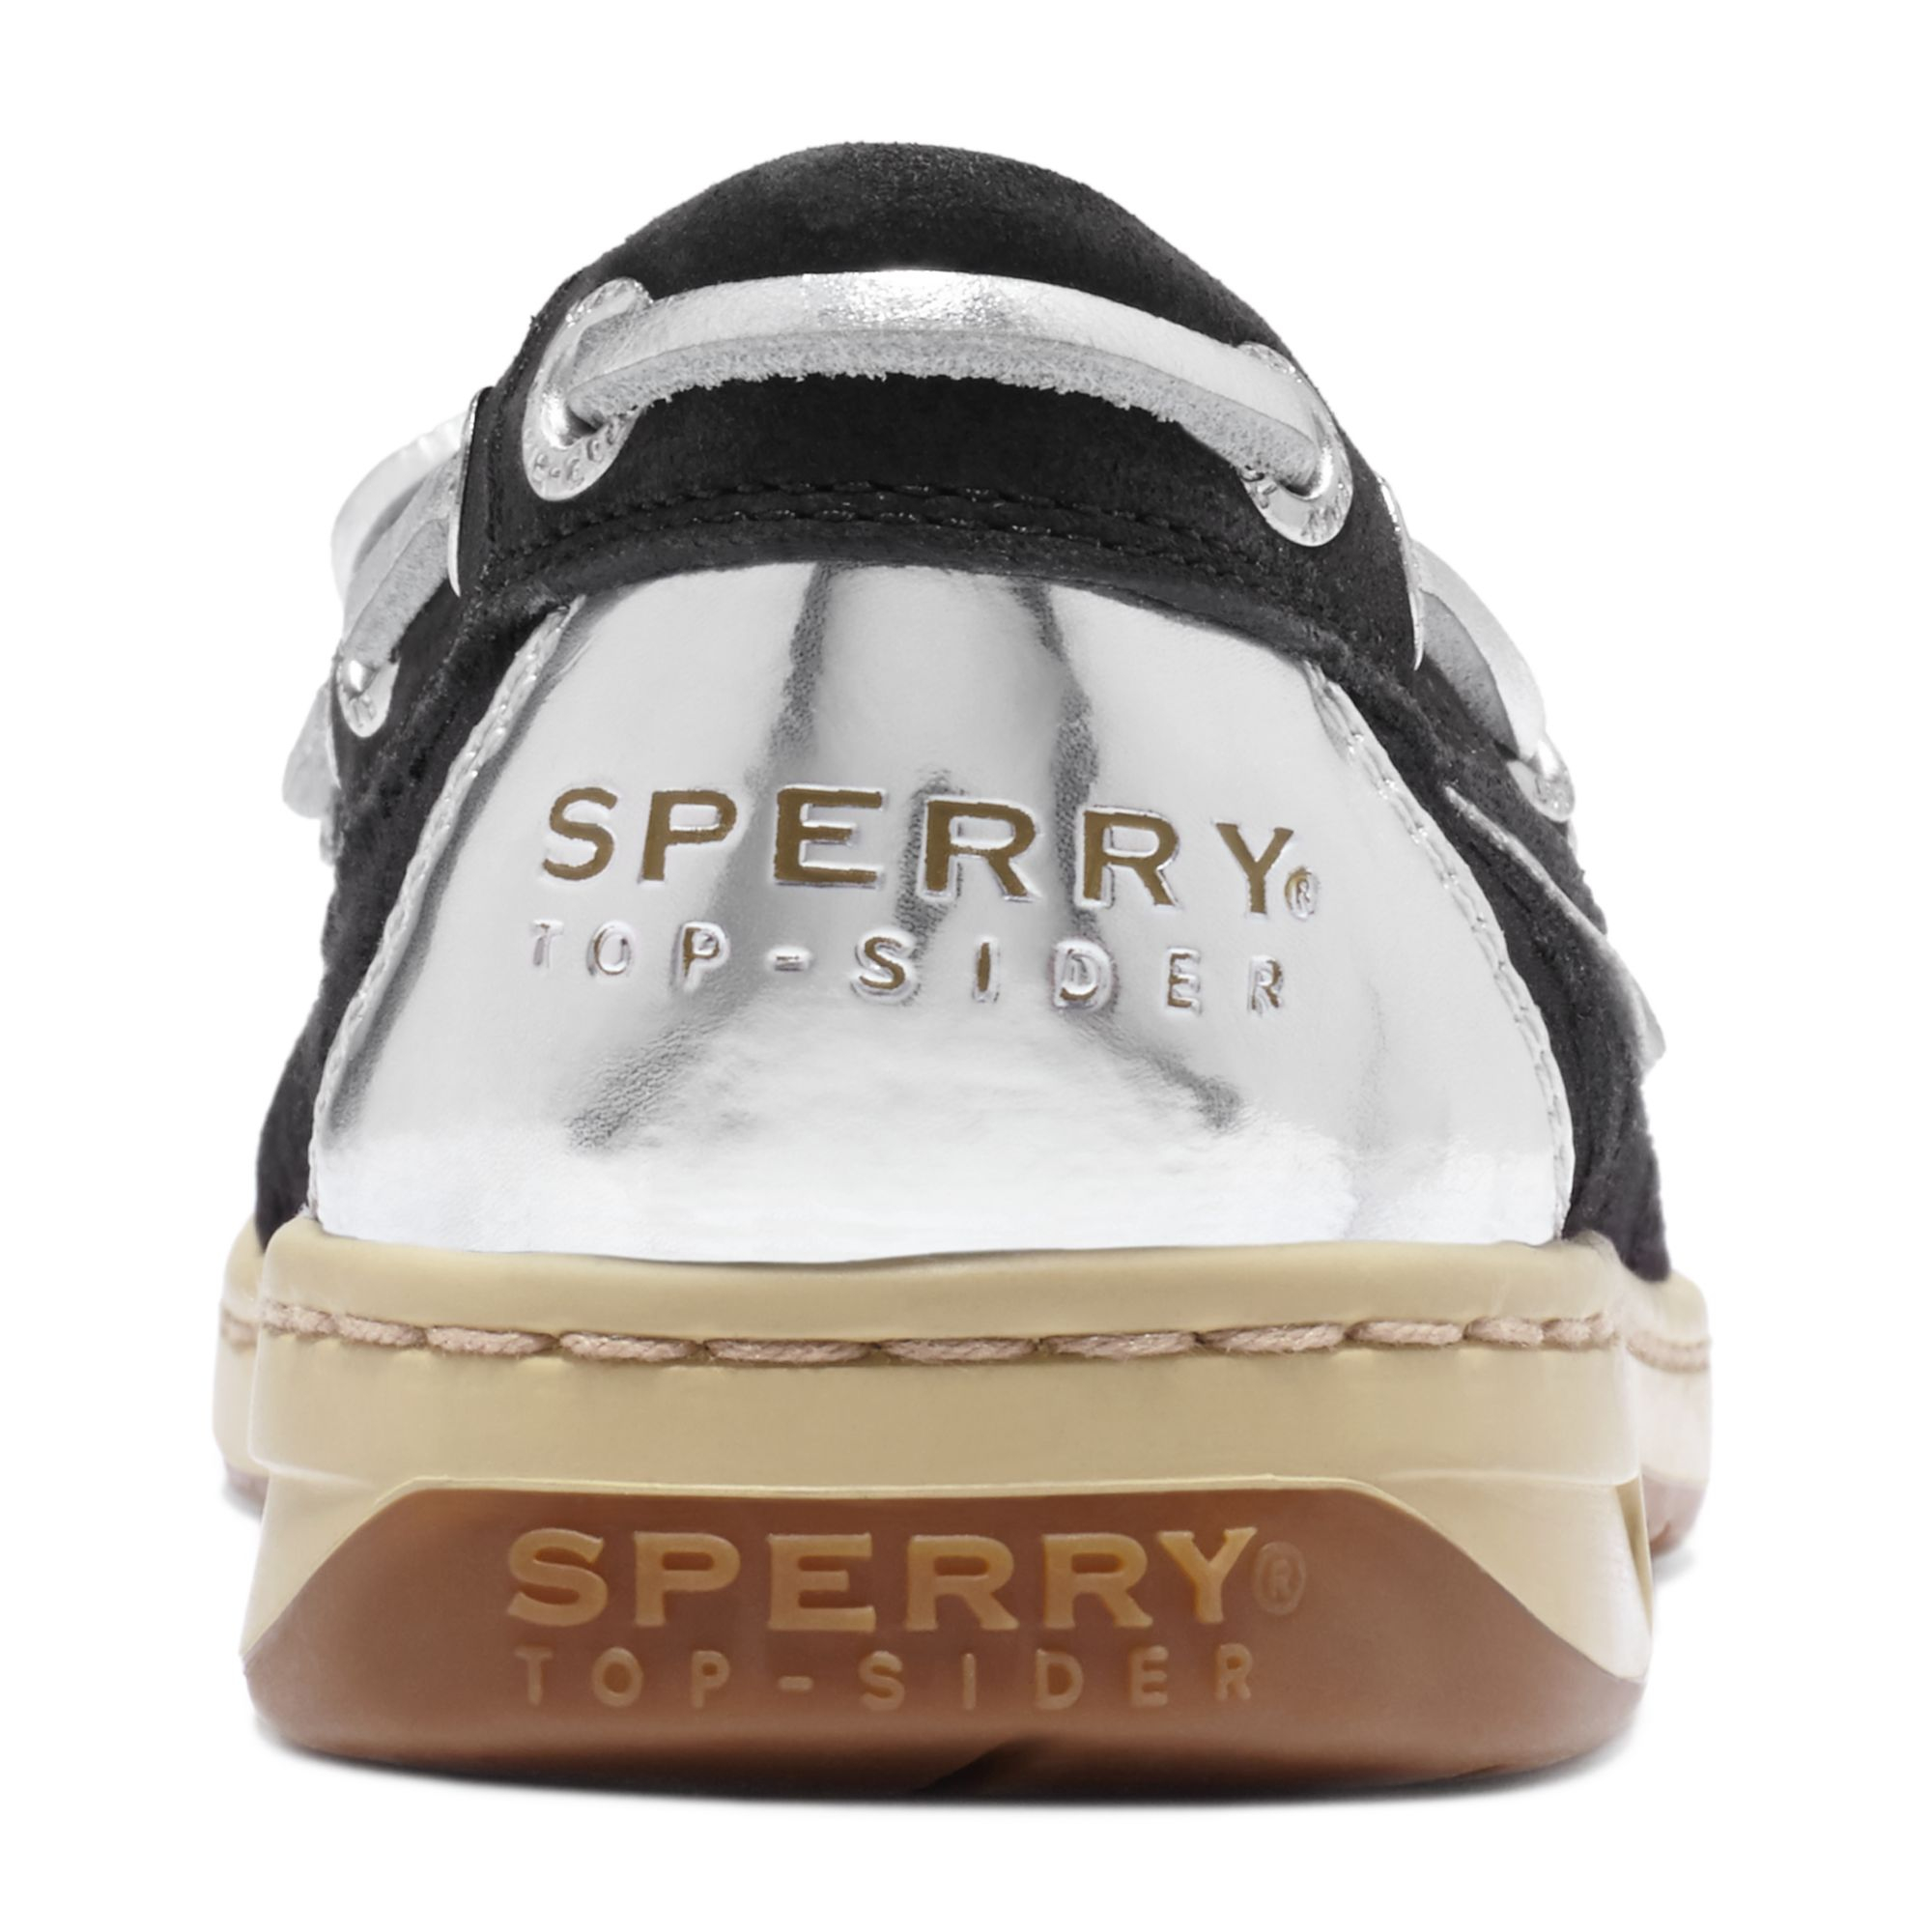 Sperry+Top-SiderSperry Top-Sider Angelfish Chaussures Bateau en Maille Ouverte pour Femme 